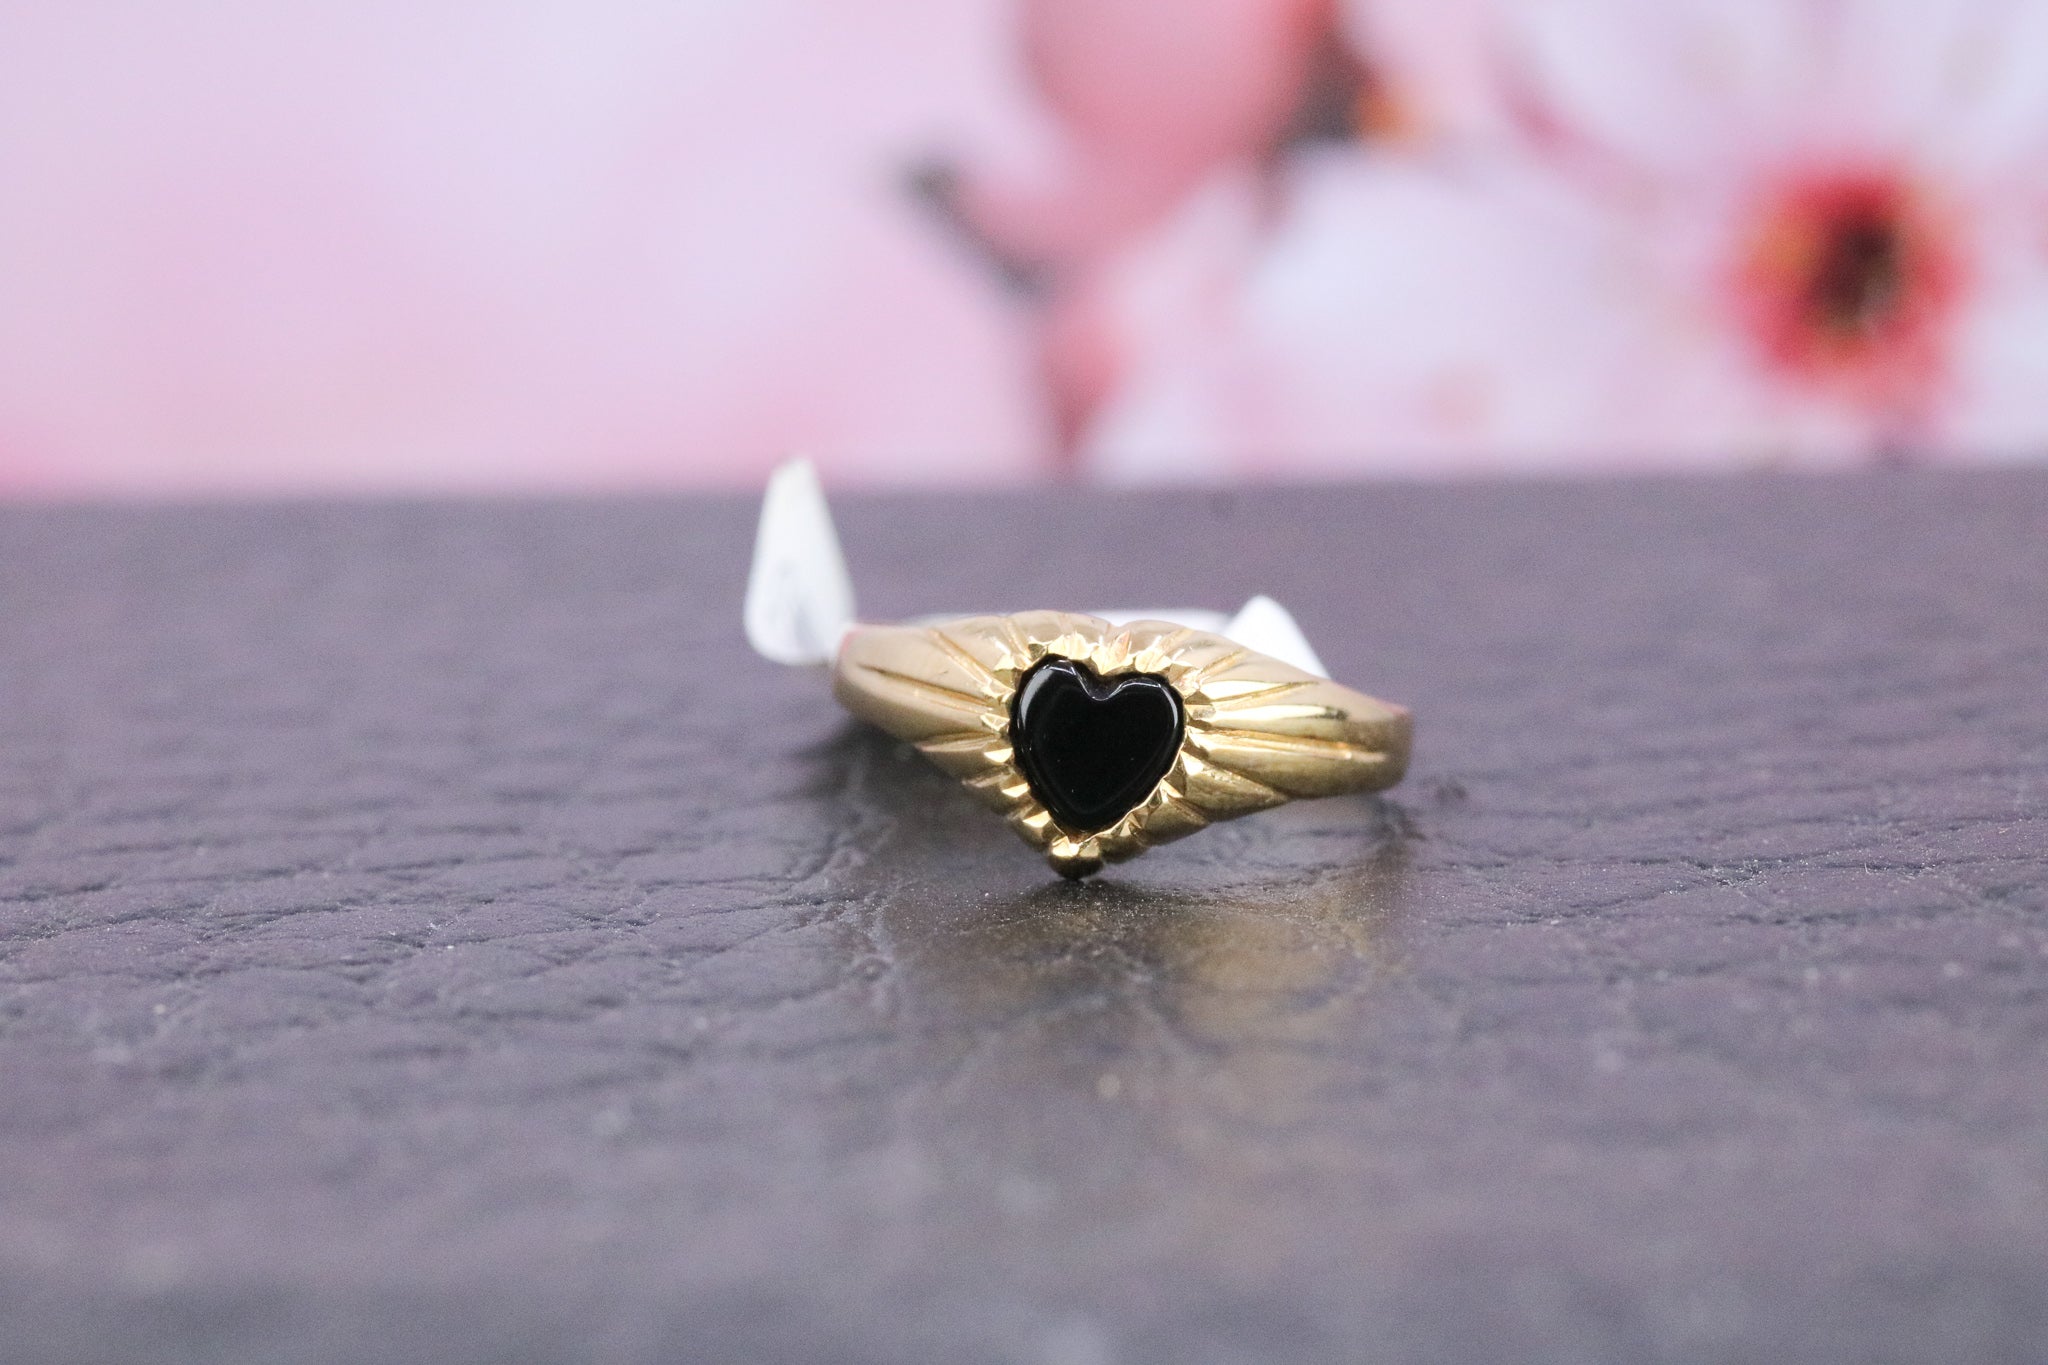 9ct Gold Onyx Ring - CO1382 - Hallmark Jewellers Formby & The Jewellers Bench Widnes